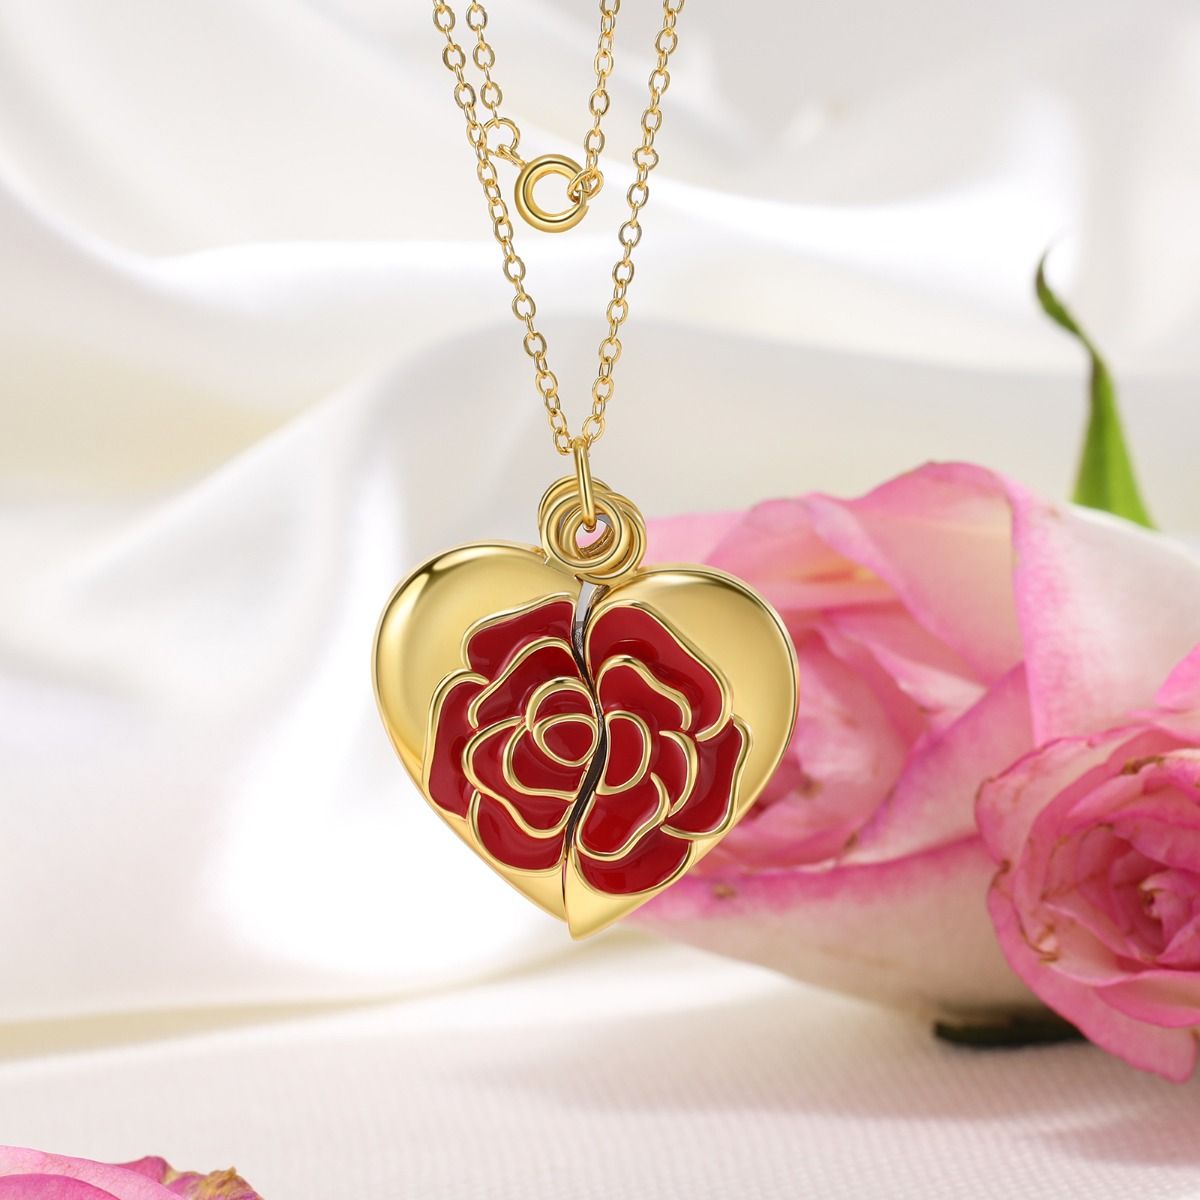 Personalised Rose Heart Photo Necklace | Bespoke Gift Of Love For Her